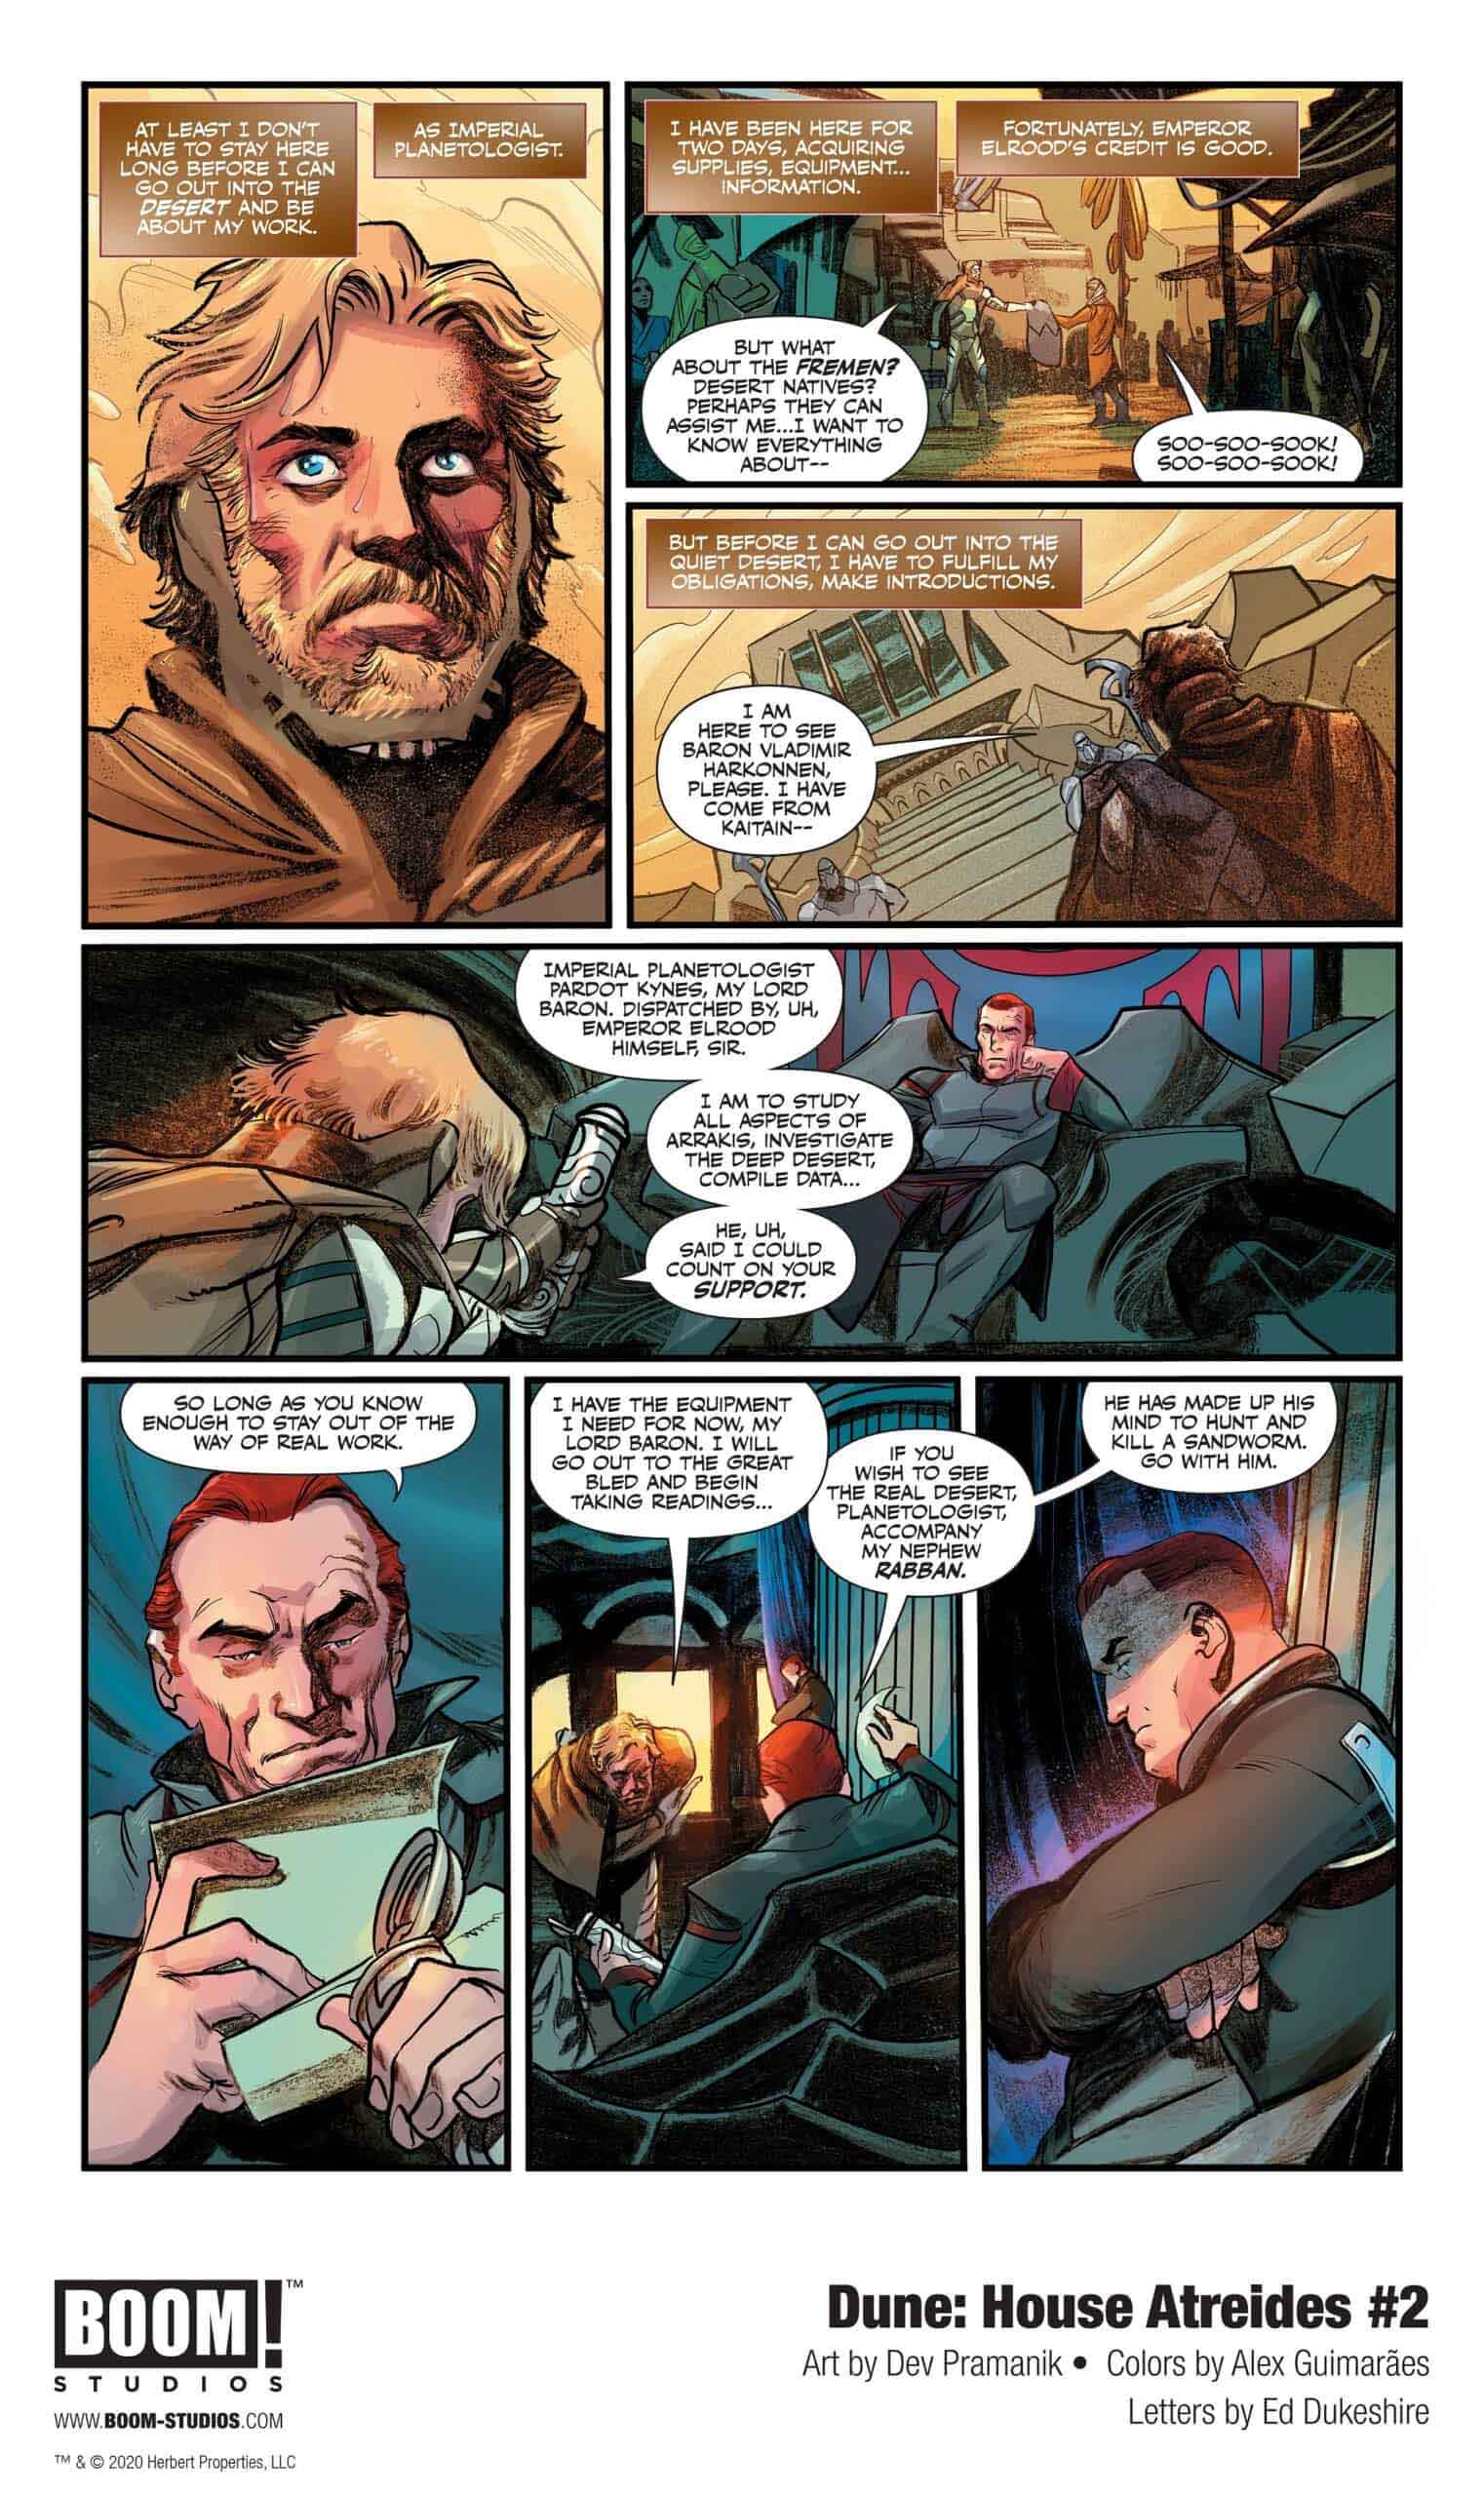 Dune: House Atreides comic series. Issue #2, preview page 2.